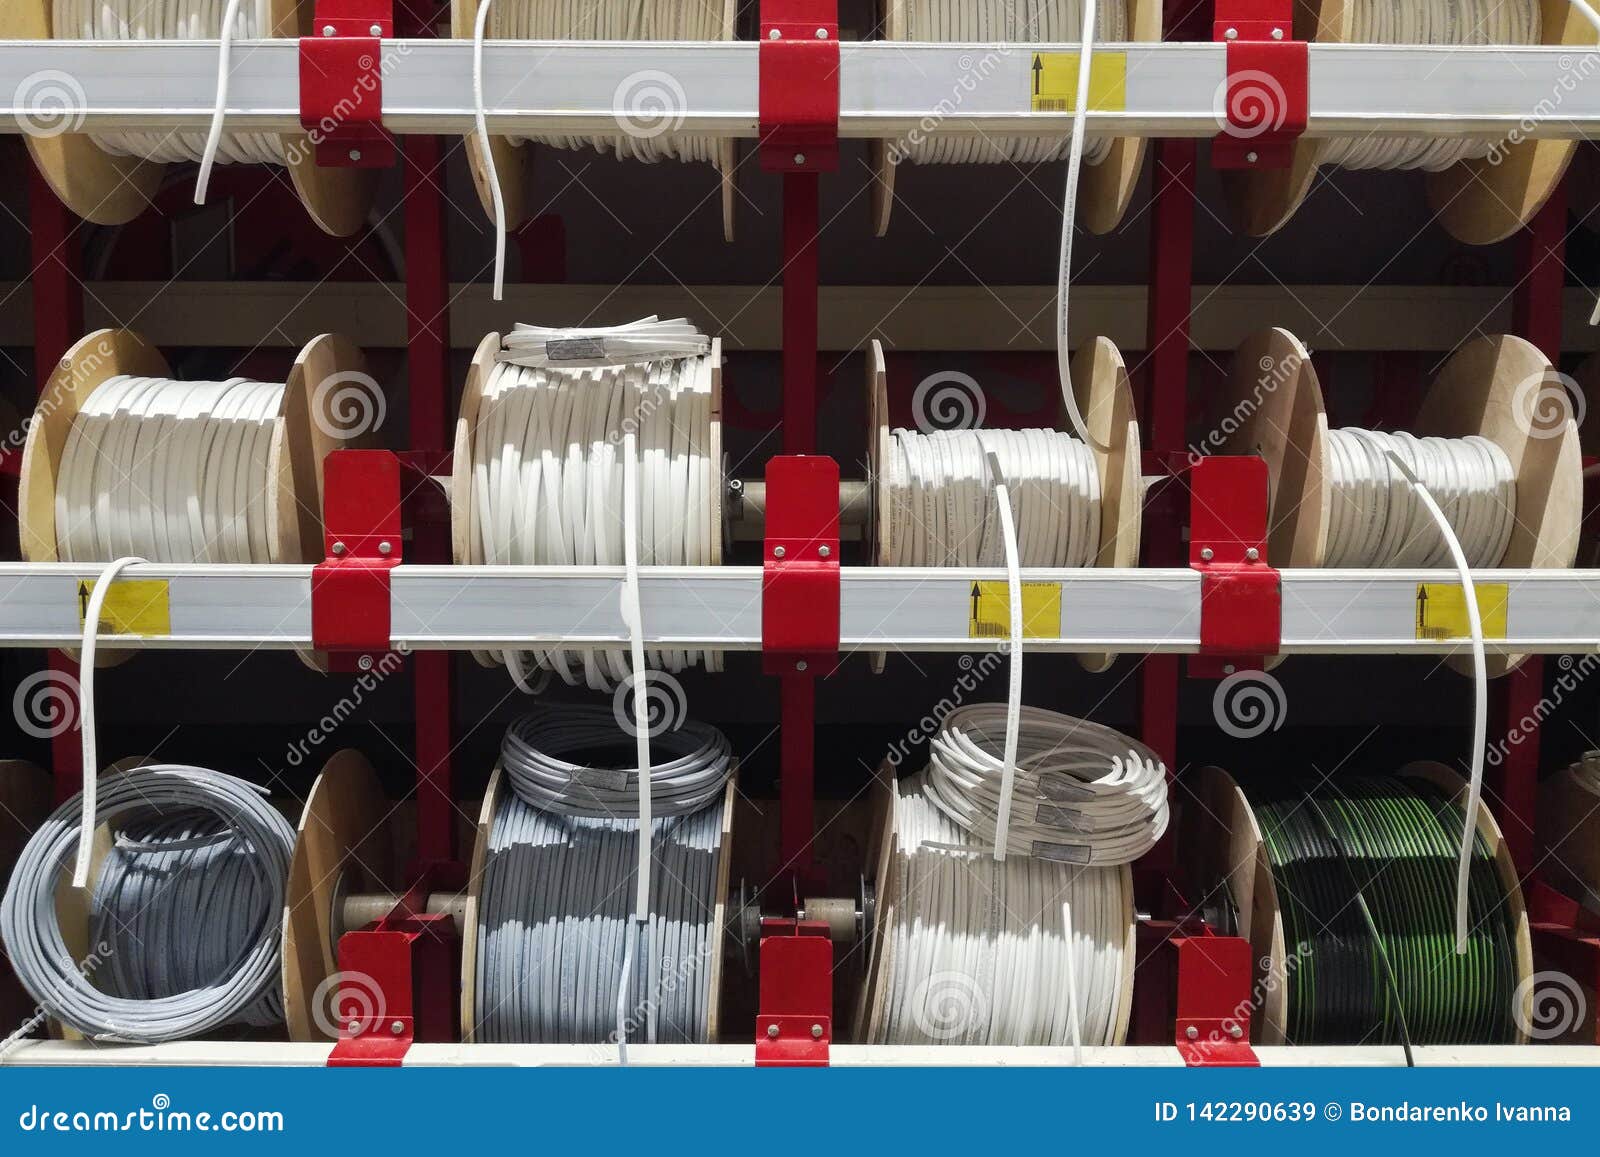 Different Electric White Cables. Wire Wound into Skeins and Rings. Electric  Wires Cable Products Samples in Store Stock Image - Image of industry,  cabling: 142290639